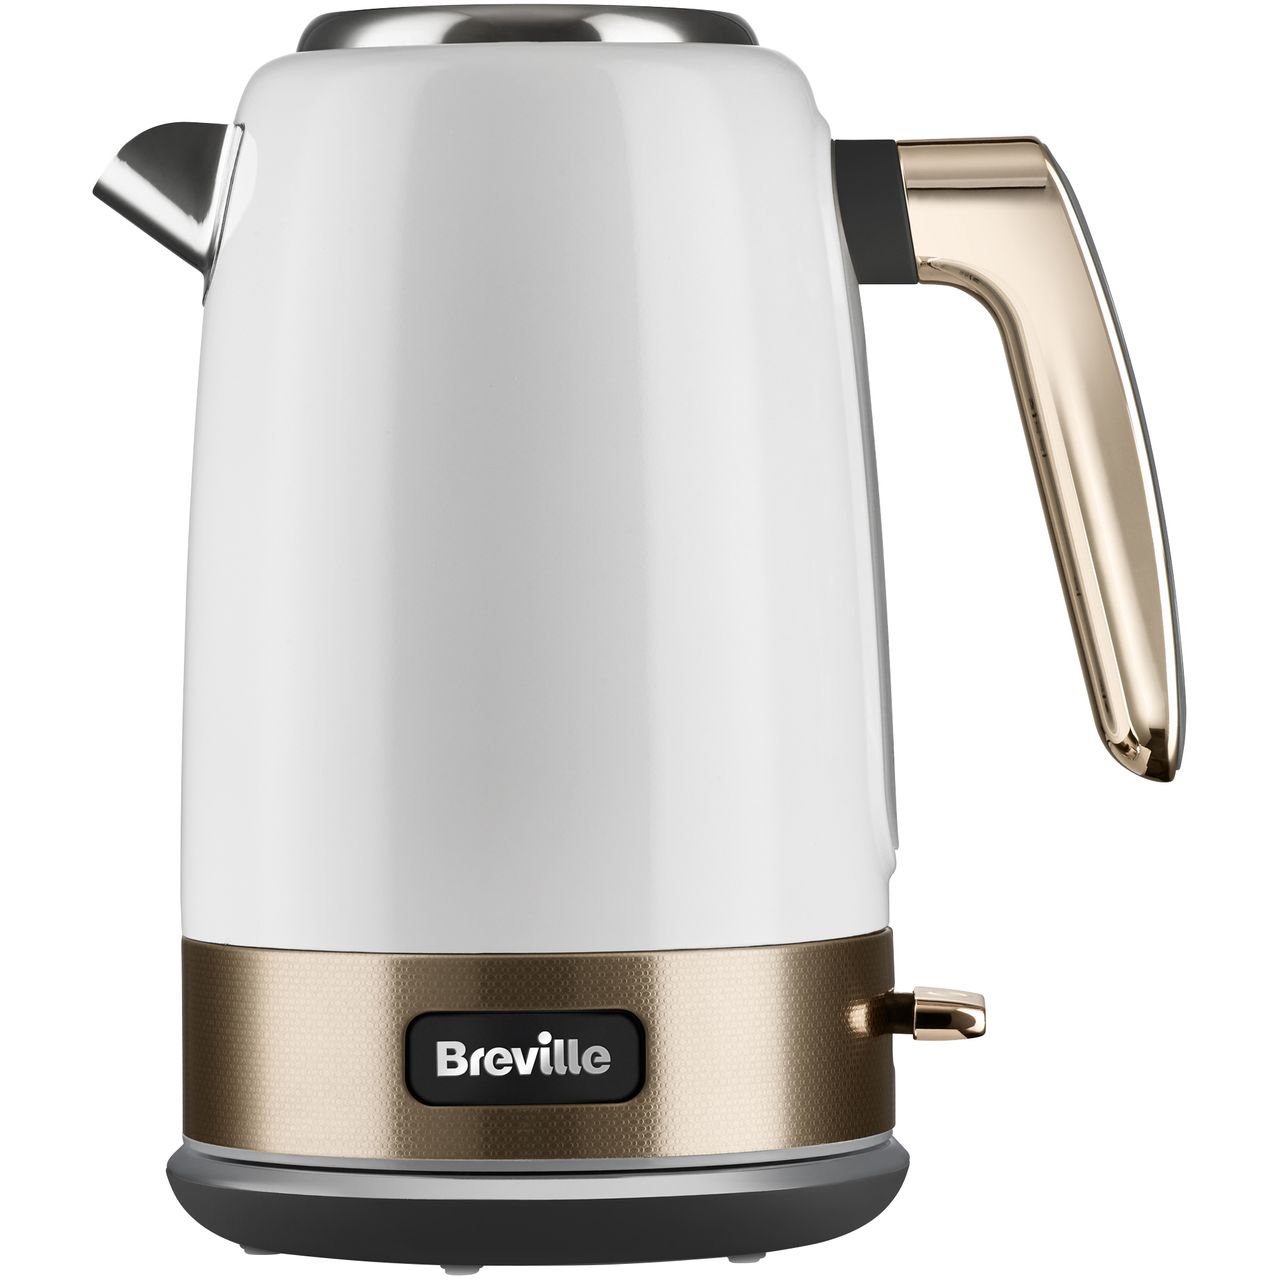 Breville New York Collection VKT142 Kettle Review